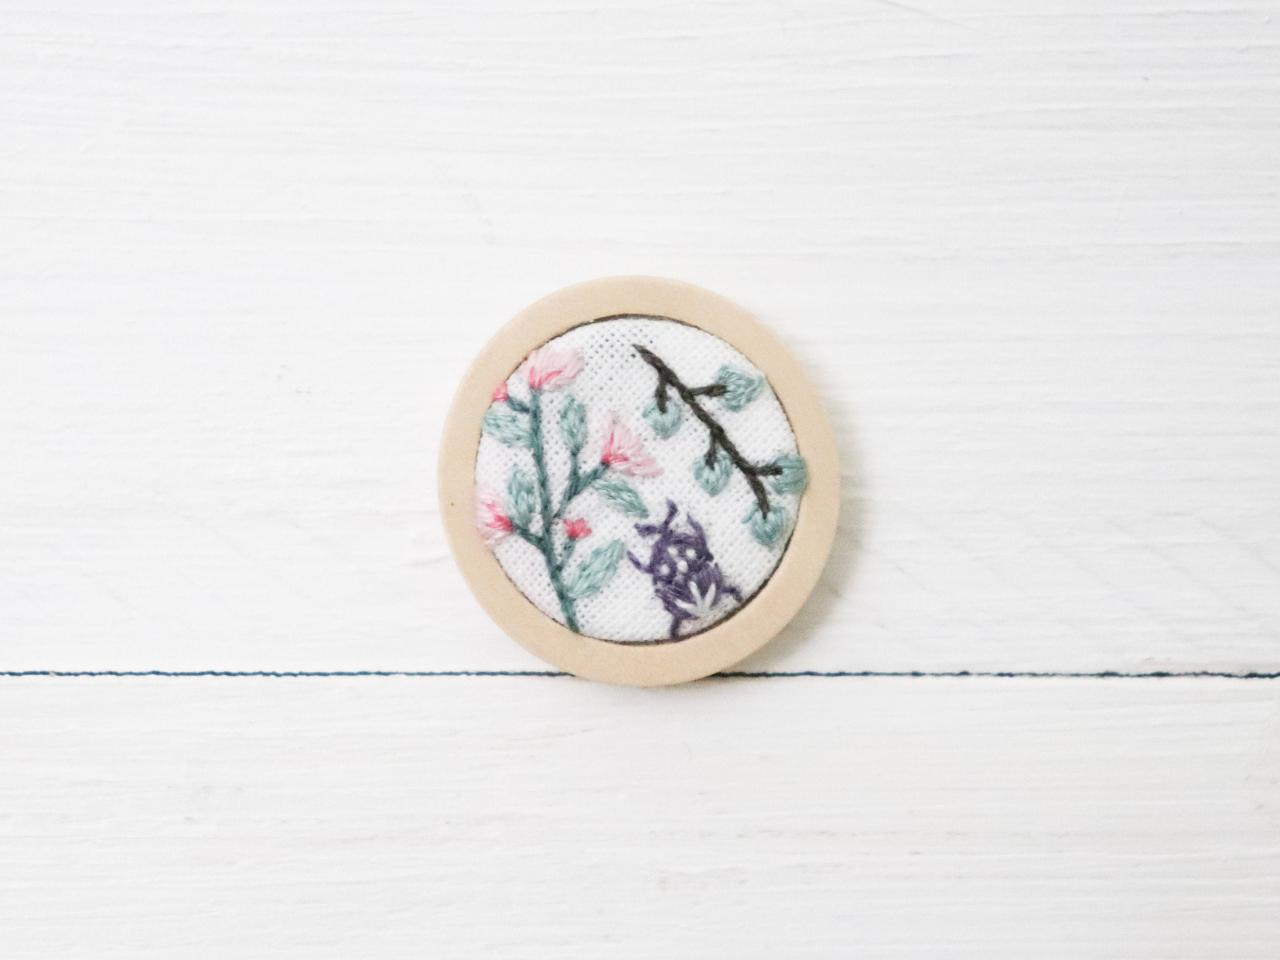 Miniature Embroidery Pin Floral Brooch Floral Pin Embroidery Brooch Hand Embroidery Embroidered Pin Embroidered Brooch Flower Pin